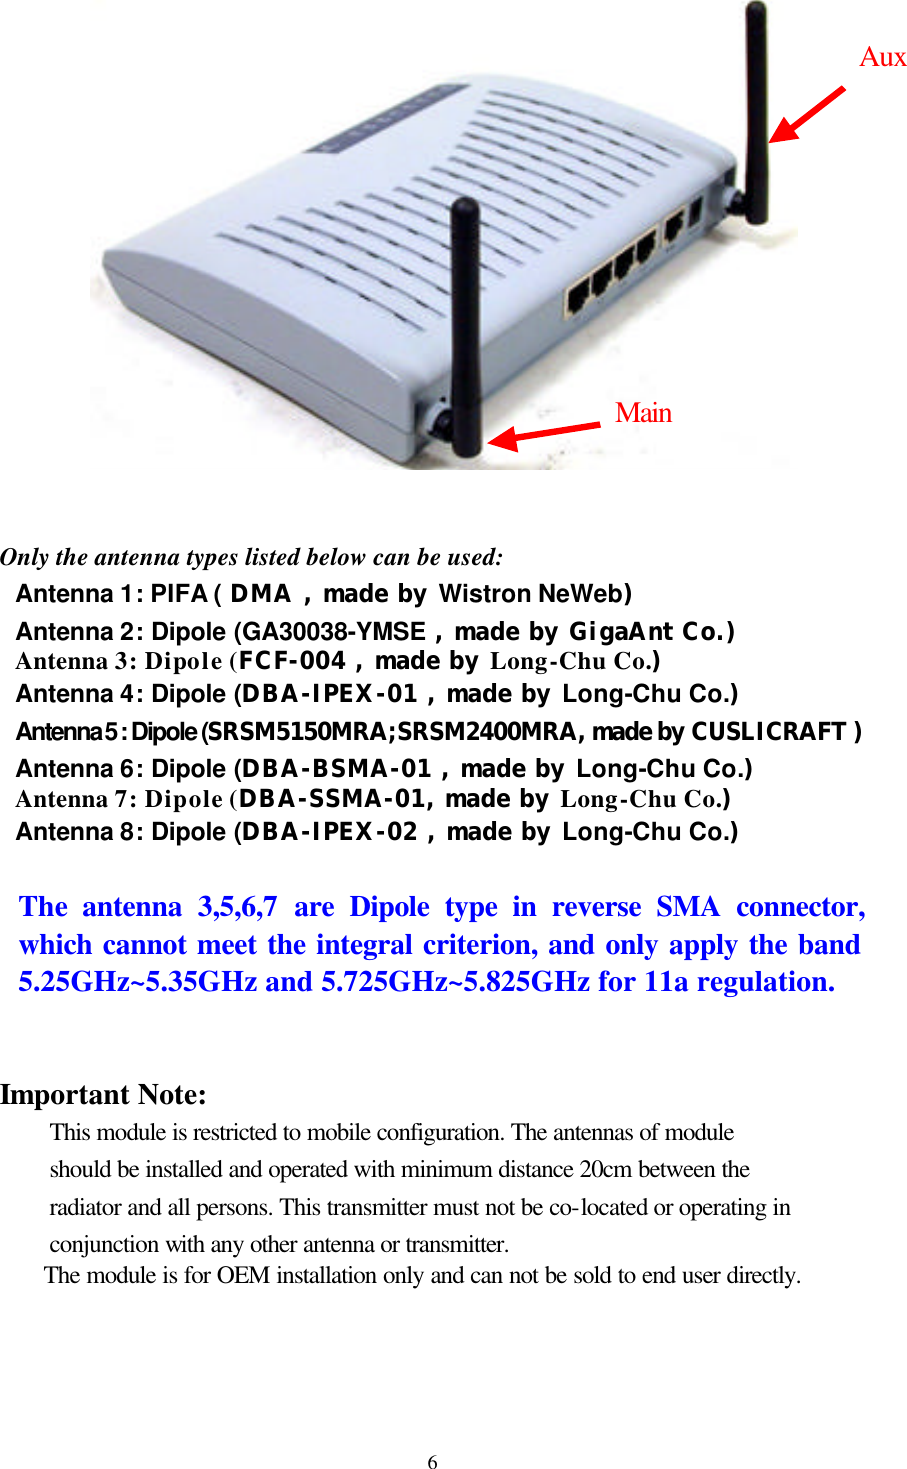  6               Only the antenna types listed below can be used: Antenna 1: PIFA ( DMA , made by Wistron NeWeb) Antenna 2: Dipole (GA30038-YMSE , made by GigaAnt Co.) Antenna 3: Dipole (FCF-004 , made by Long-Chu Co.) Antenna 4: Dipole (DBA-IPEX-01 , made by Long-Chu Co.) Antenna 5 : Dipole (SRSM5150MRA;SRSM2400MRA, made by CUSLICRAFT ) Antenna 6: Dipole (DBA-BSMA-01 , made by Long-Chu Co.) Antenna 7: Dipole (DBA-SSMA-01, made by Long-Chu Co.) Antenna 8: Dipole (DBA-IPEX-02 , made by Long-Chu Co.)  The  antenna 3,5,6,7 are Dipole type in reverse SMA connector, which cannot meet the integral criterion, and only apply the band 5.25GHz~5.35GHz and 5.725GHz~5.825GHz for 11a regulation.   Important Note:   This module is restricted to mobile configuration. The antennas of module should be installed and operated with minimum distance 20cm between the radiator and all persons. This transmitter must not be co-located or operating in conjunction with any other antenna or transmitter.  The module is for OEM installation only and can not be sold to end user directly. Main Aux 